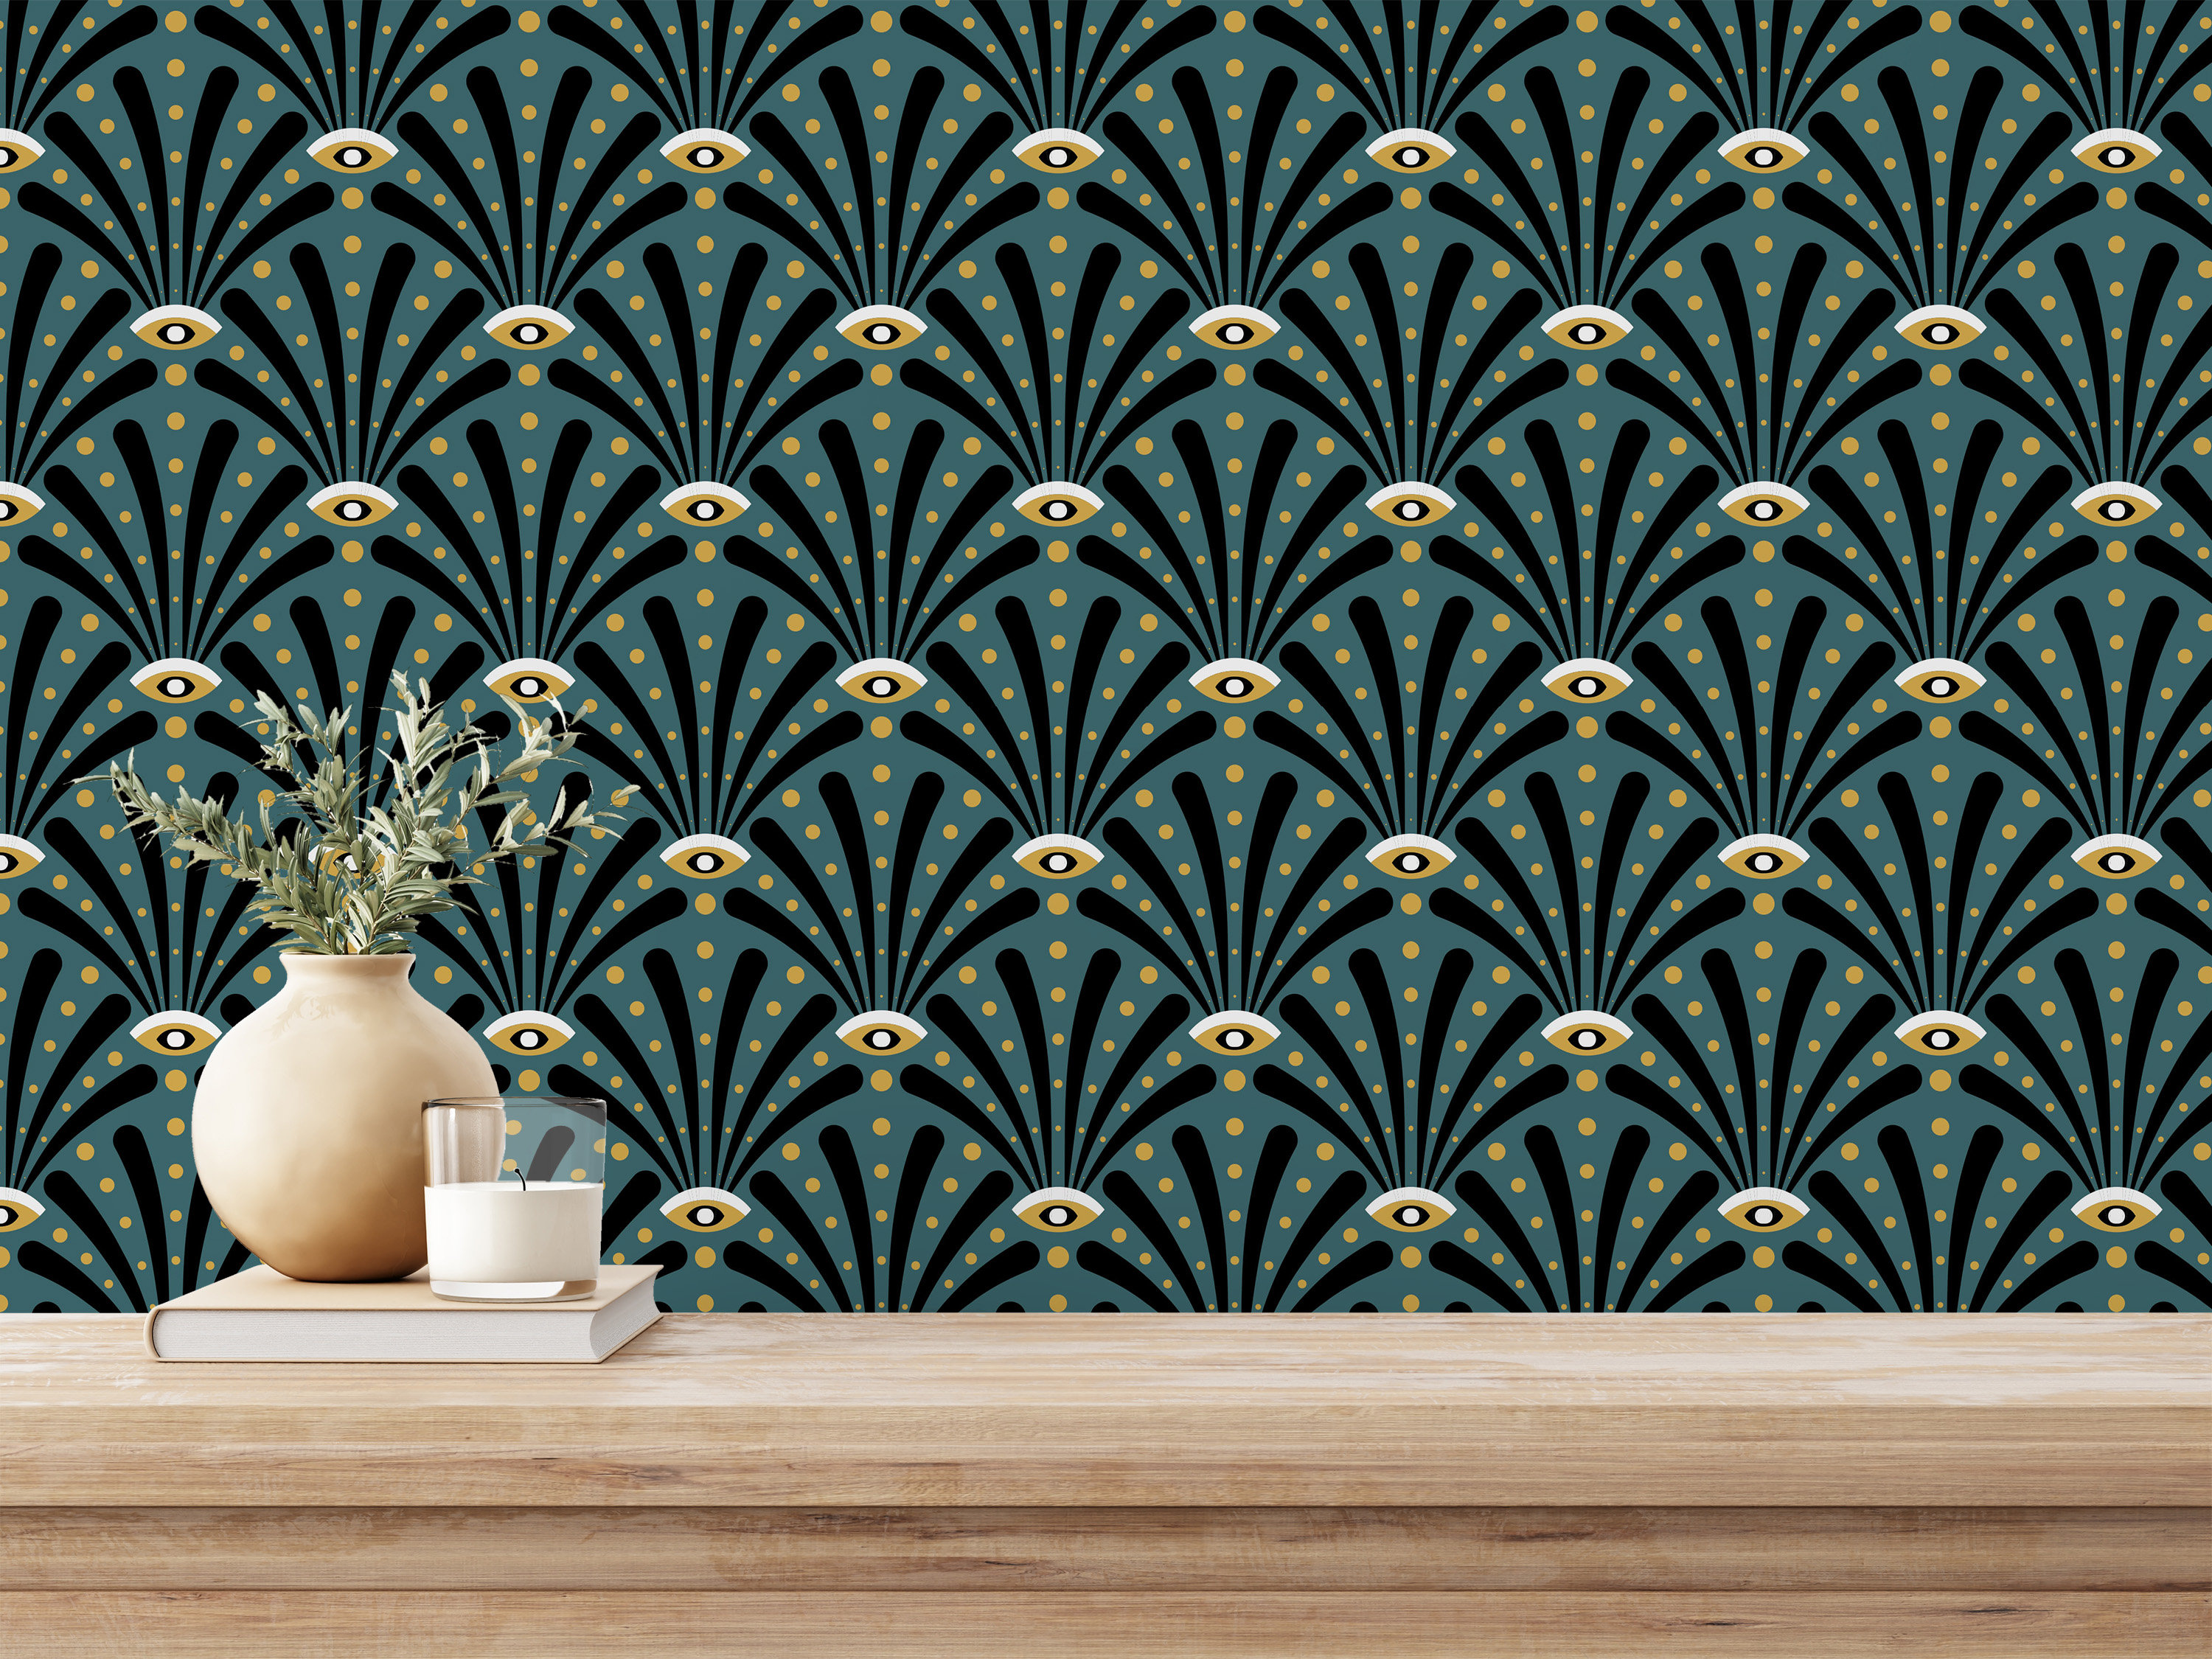 Teal Art Deco Peel and Stick Wallpaper / Eyes Removable photo